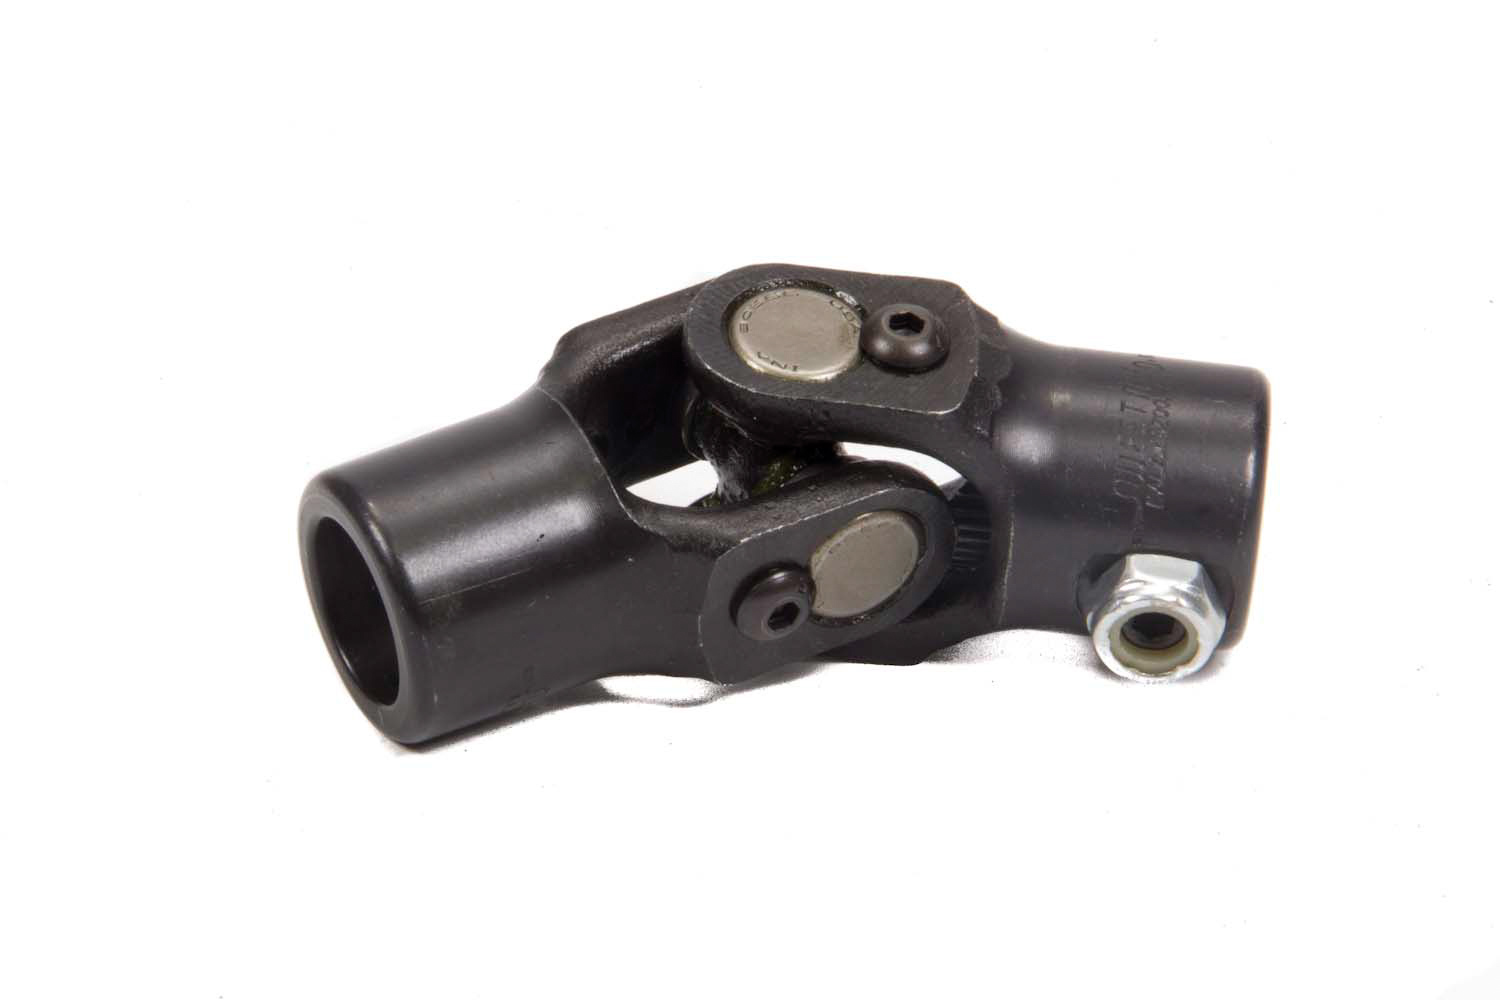 Sweet Manufacturing 401-51519 Steering Universal Joint, Single Joint, 3/4 in 30 Spline to 3/4 in Double D, Steel, Black Paint, Each